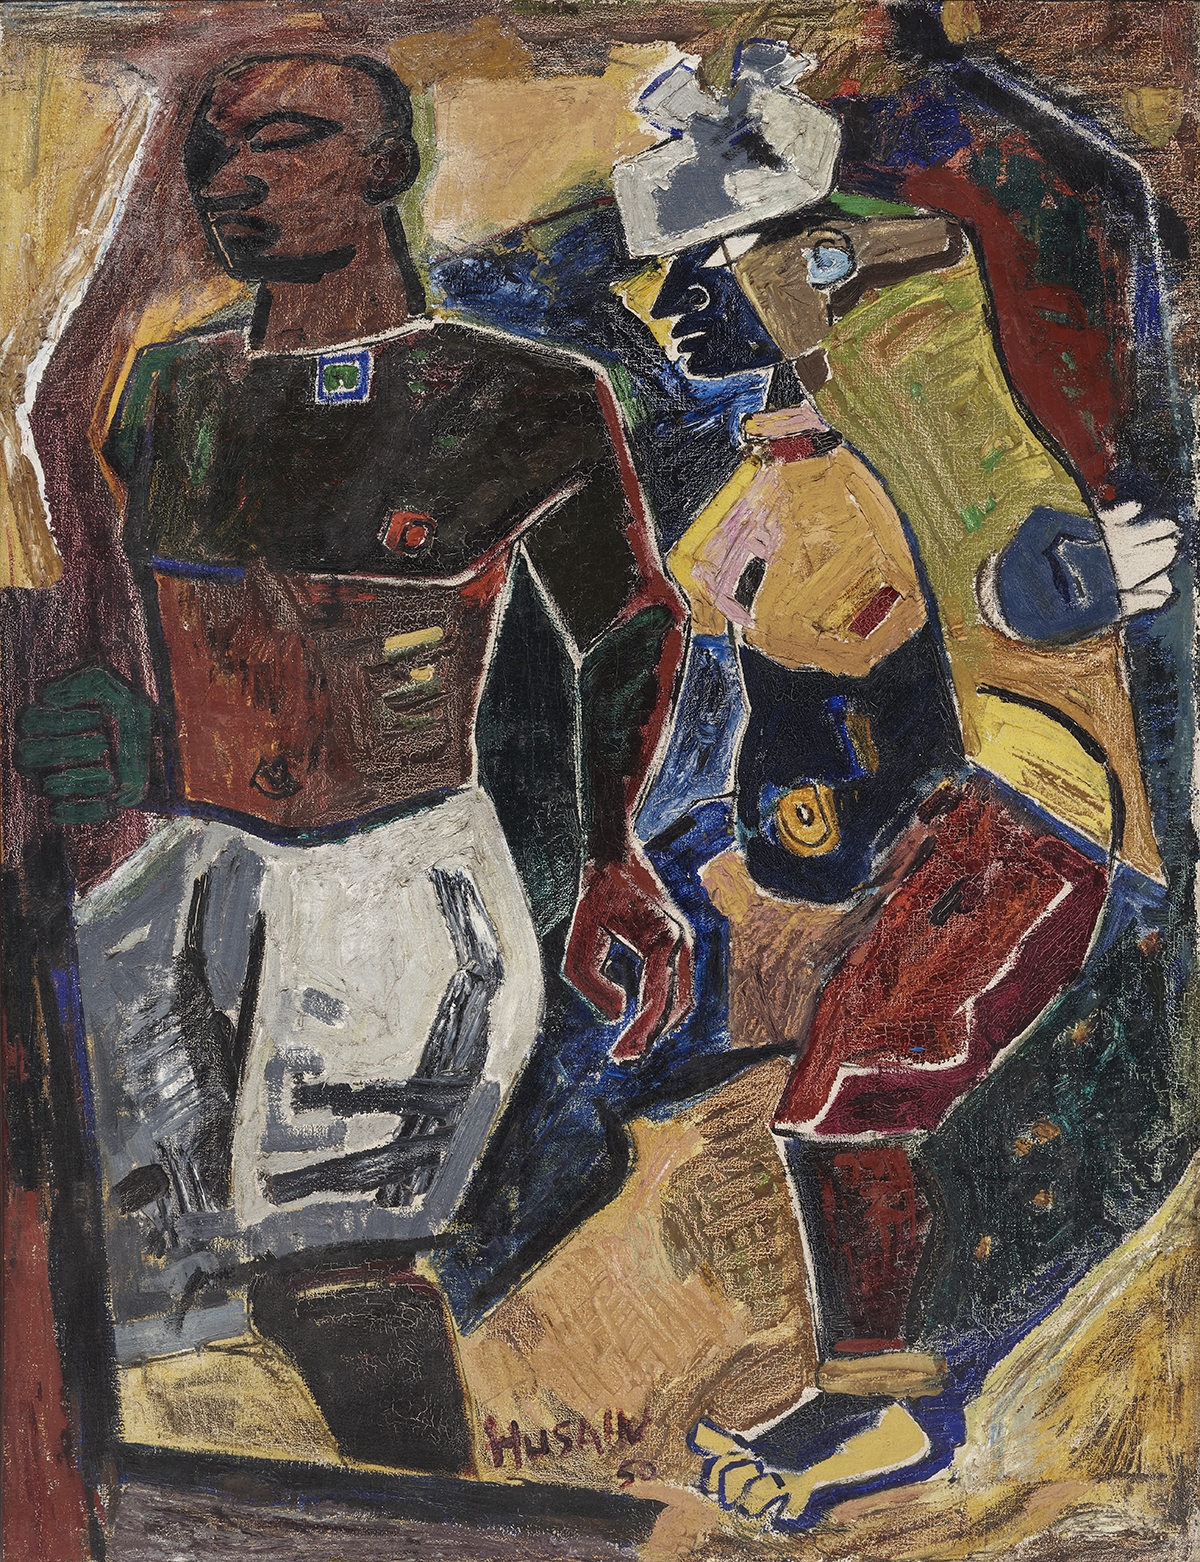 M. F. Husain. Peasant Couple, 1950. Oil on canvas. H. 47 1/2 x W. 36 1/2 in. (120.7 x 92.7 cm). Peabody Essex Museum, Gift of the Chester and Davida Herwitz Collection, 2003 E301169. Courtesy of Peabody Essex Museum, Salem, MA. Photography by Walter Silver